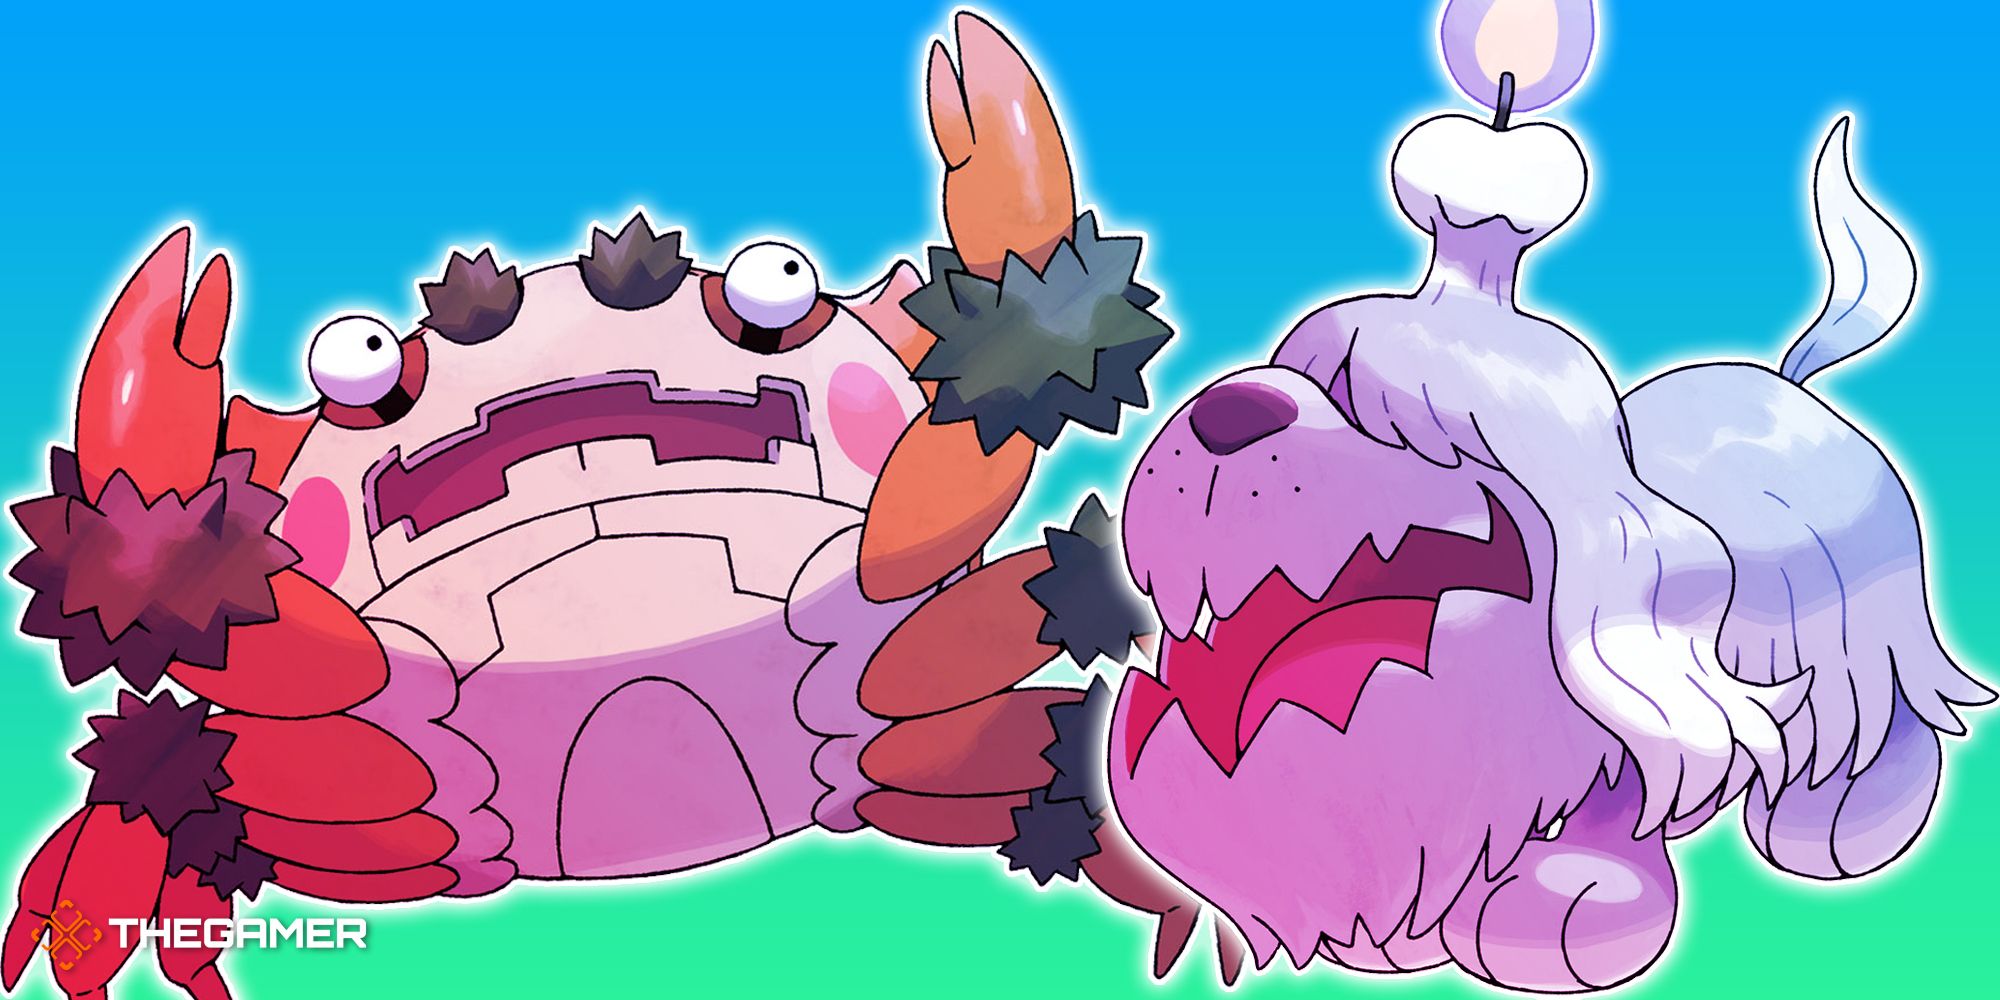 The 9 Unused Pokémon Types, Ranked by Potential